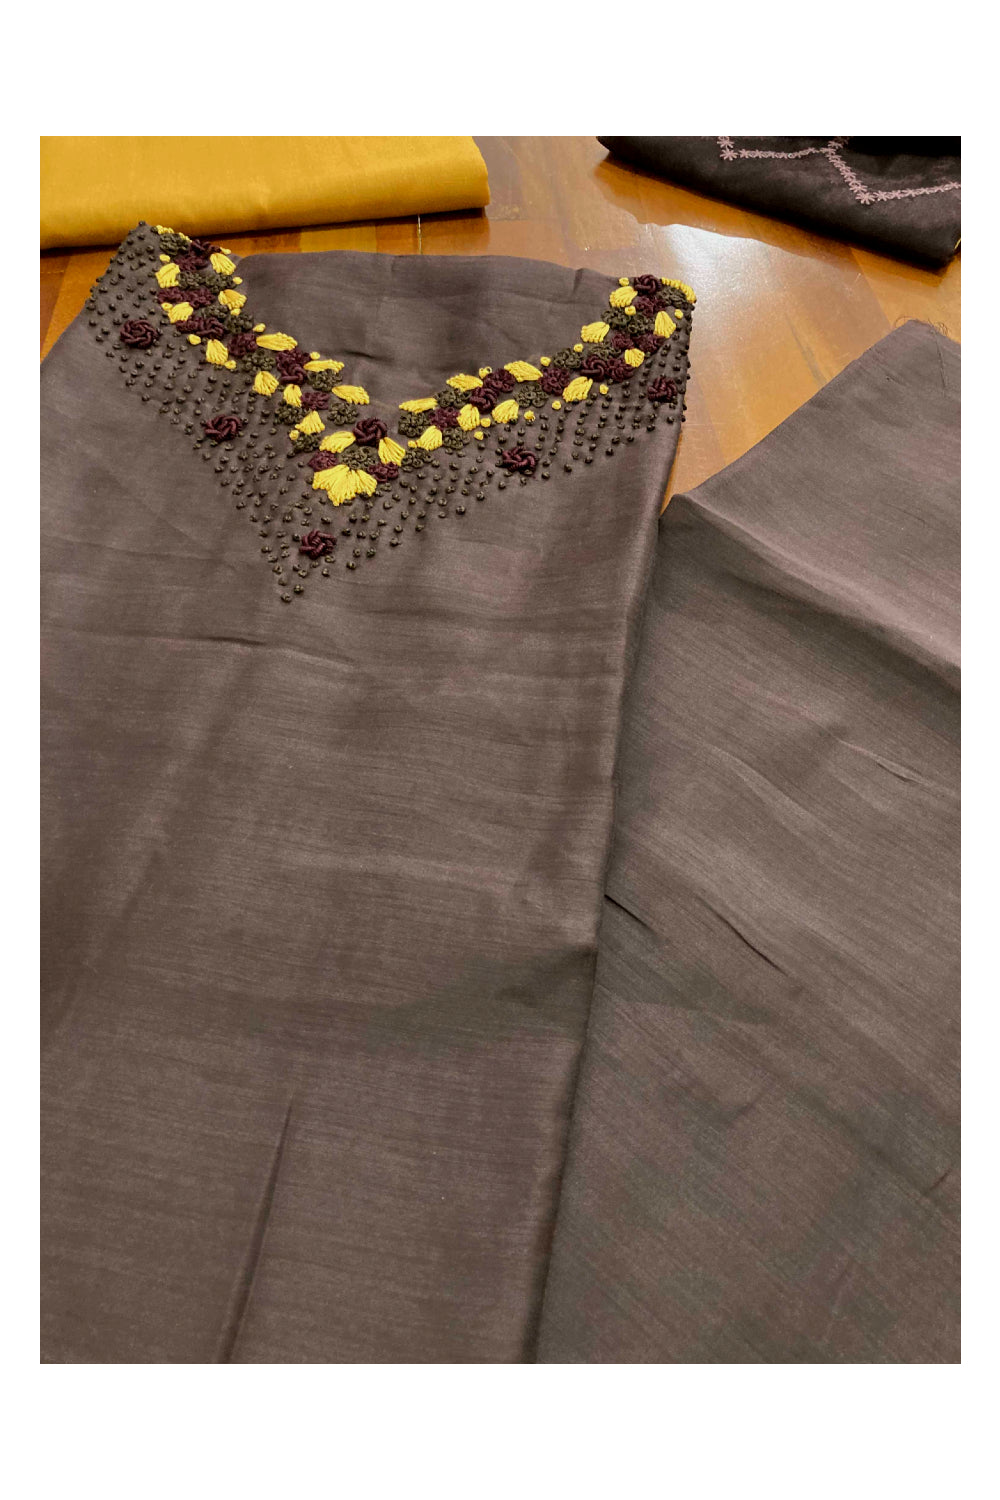 Southloom™ Cotton Churidar Salwar Suit Material in Dark Brown with Embroidery Work